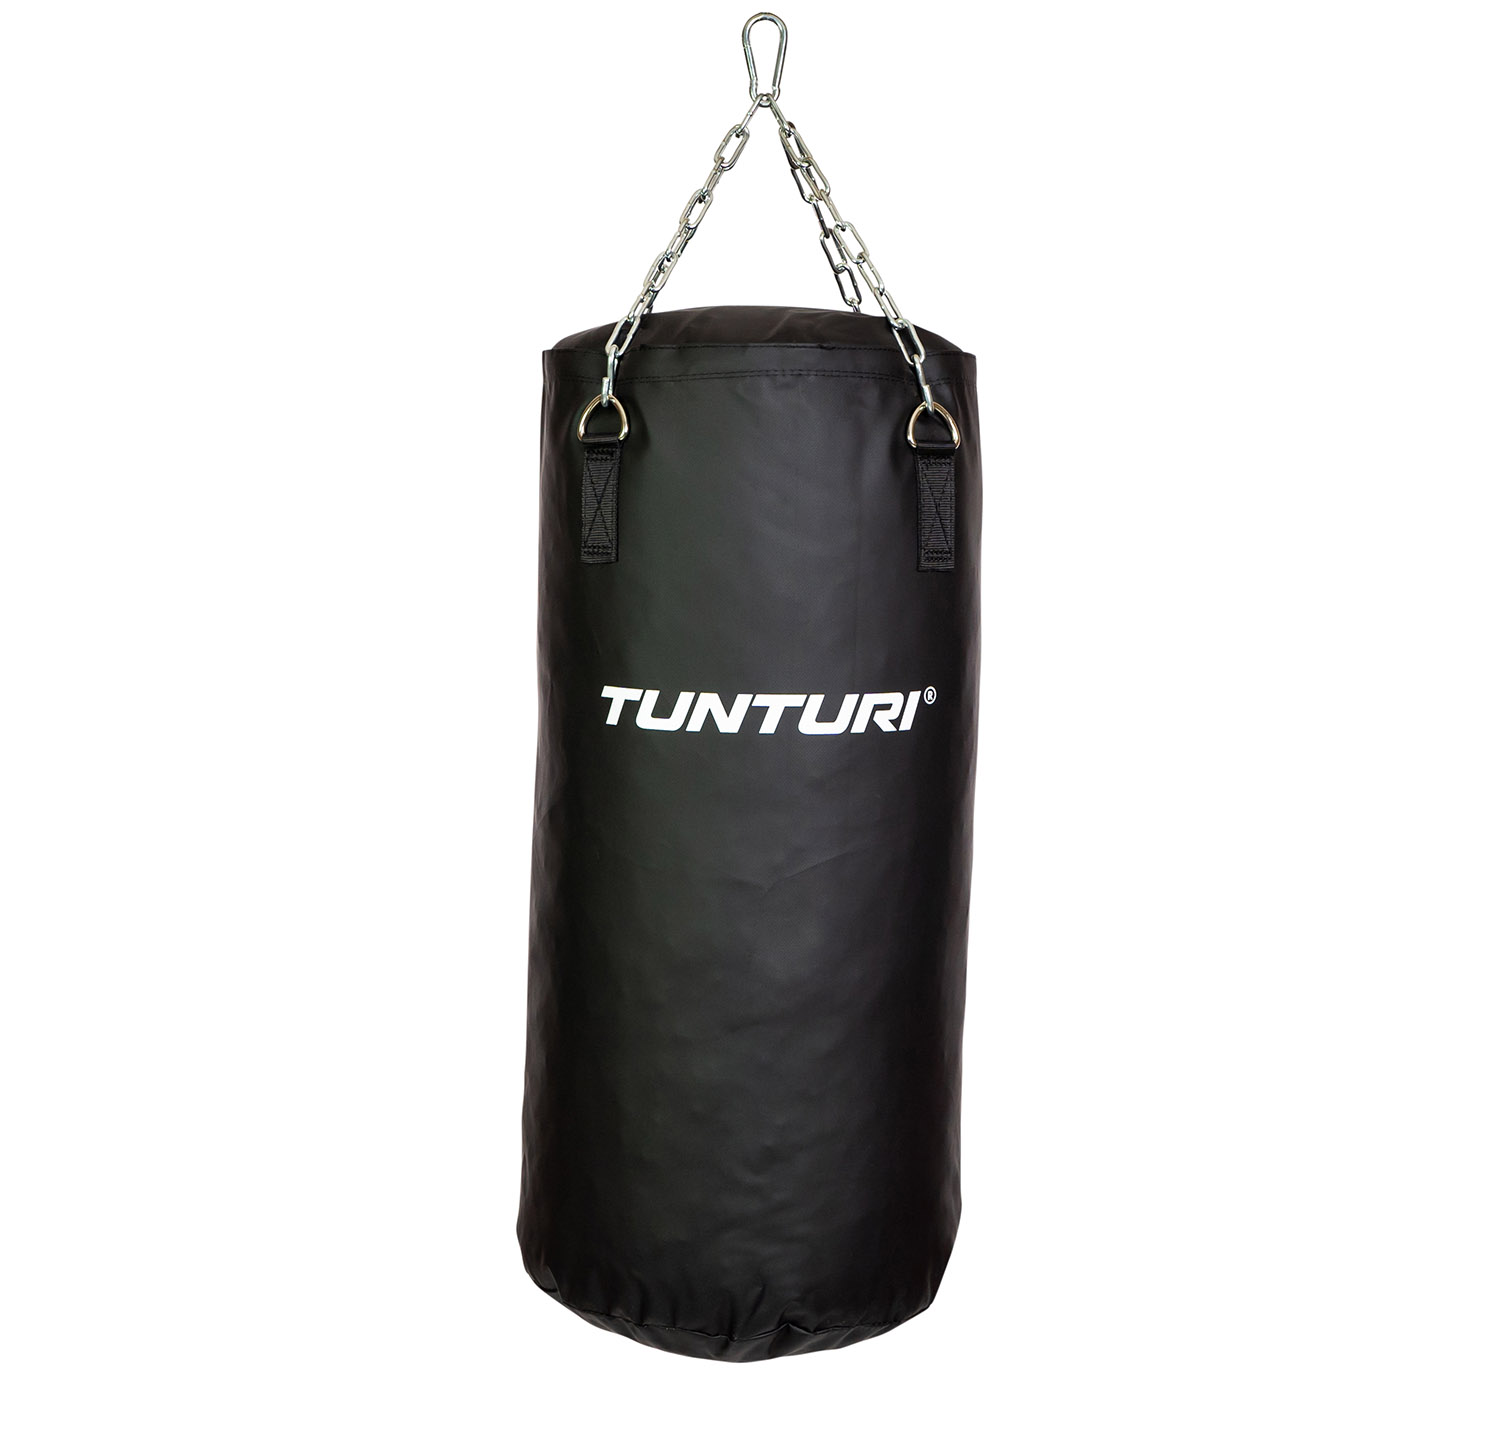 Boxing Bag Filled with Chain